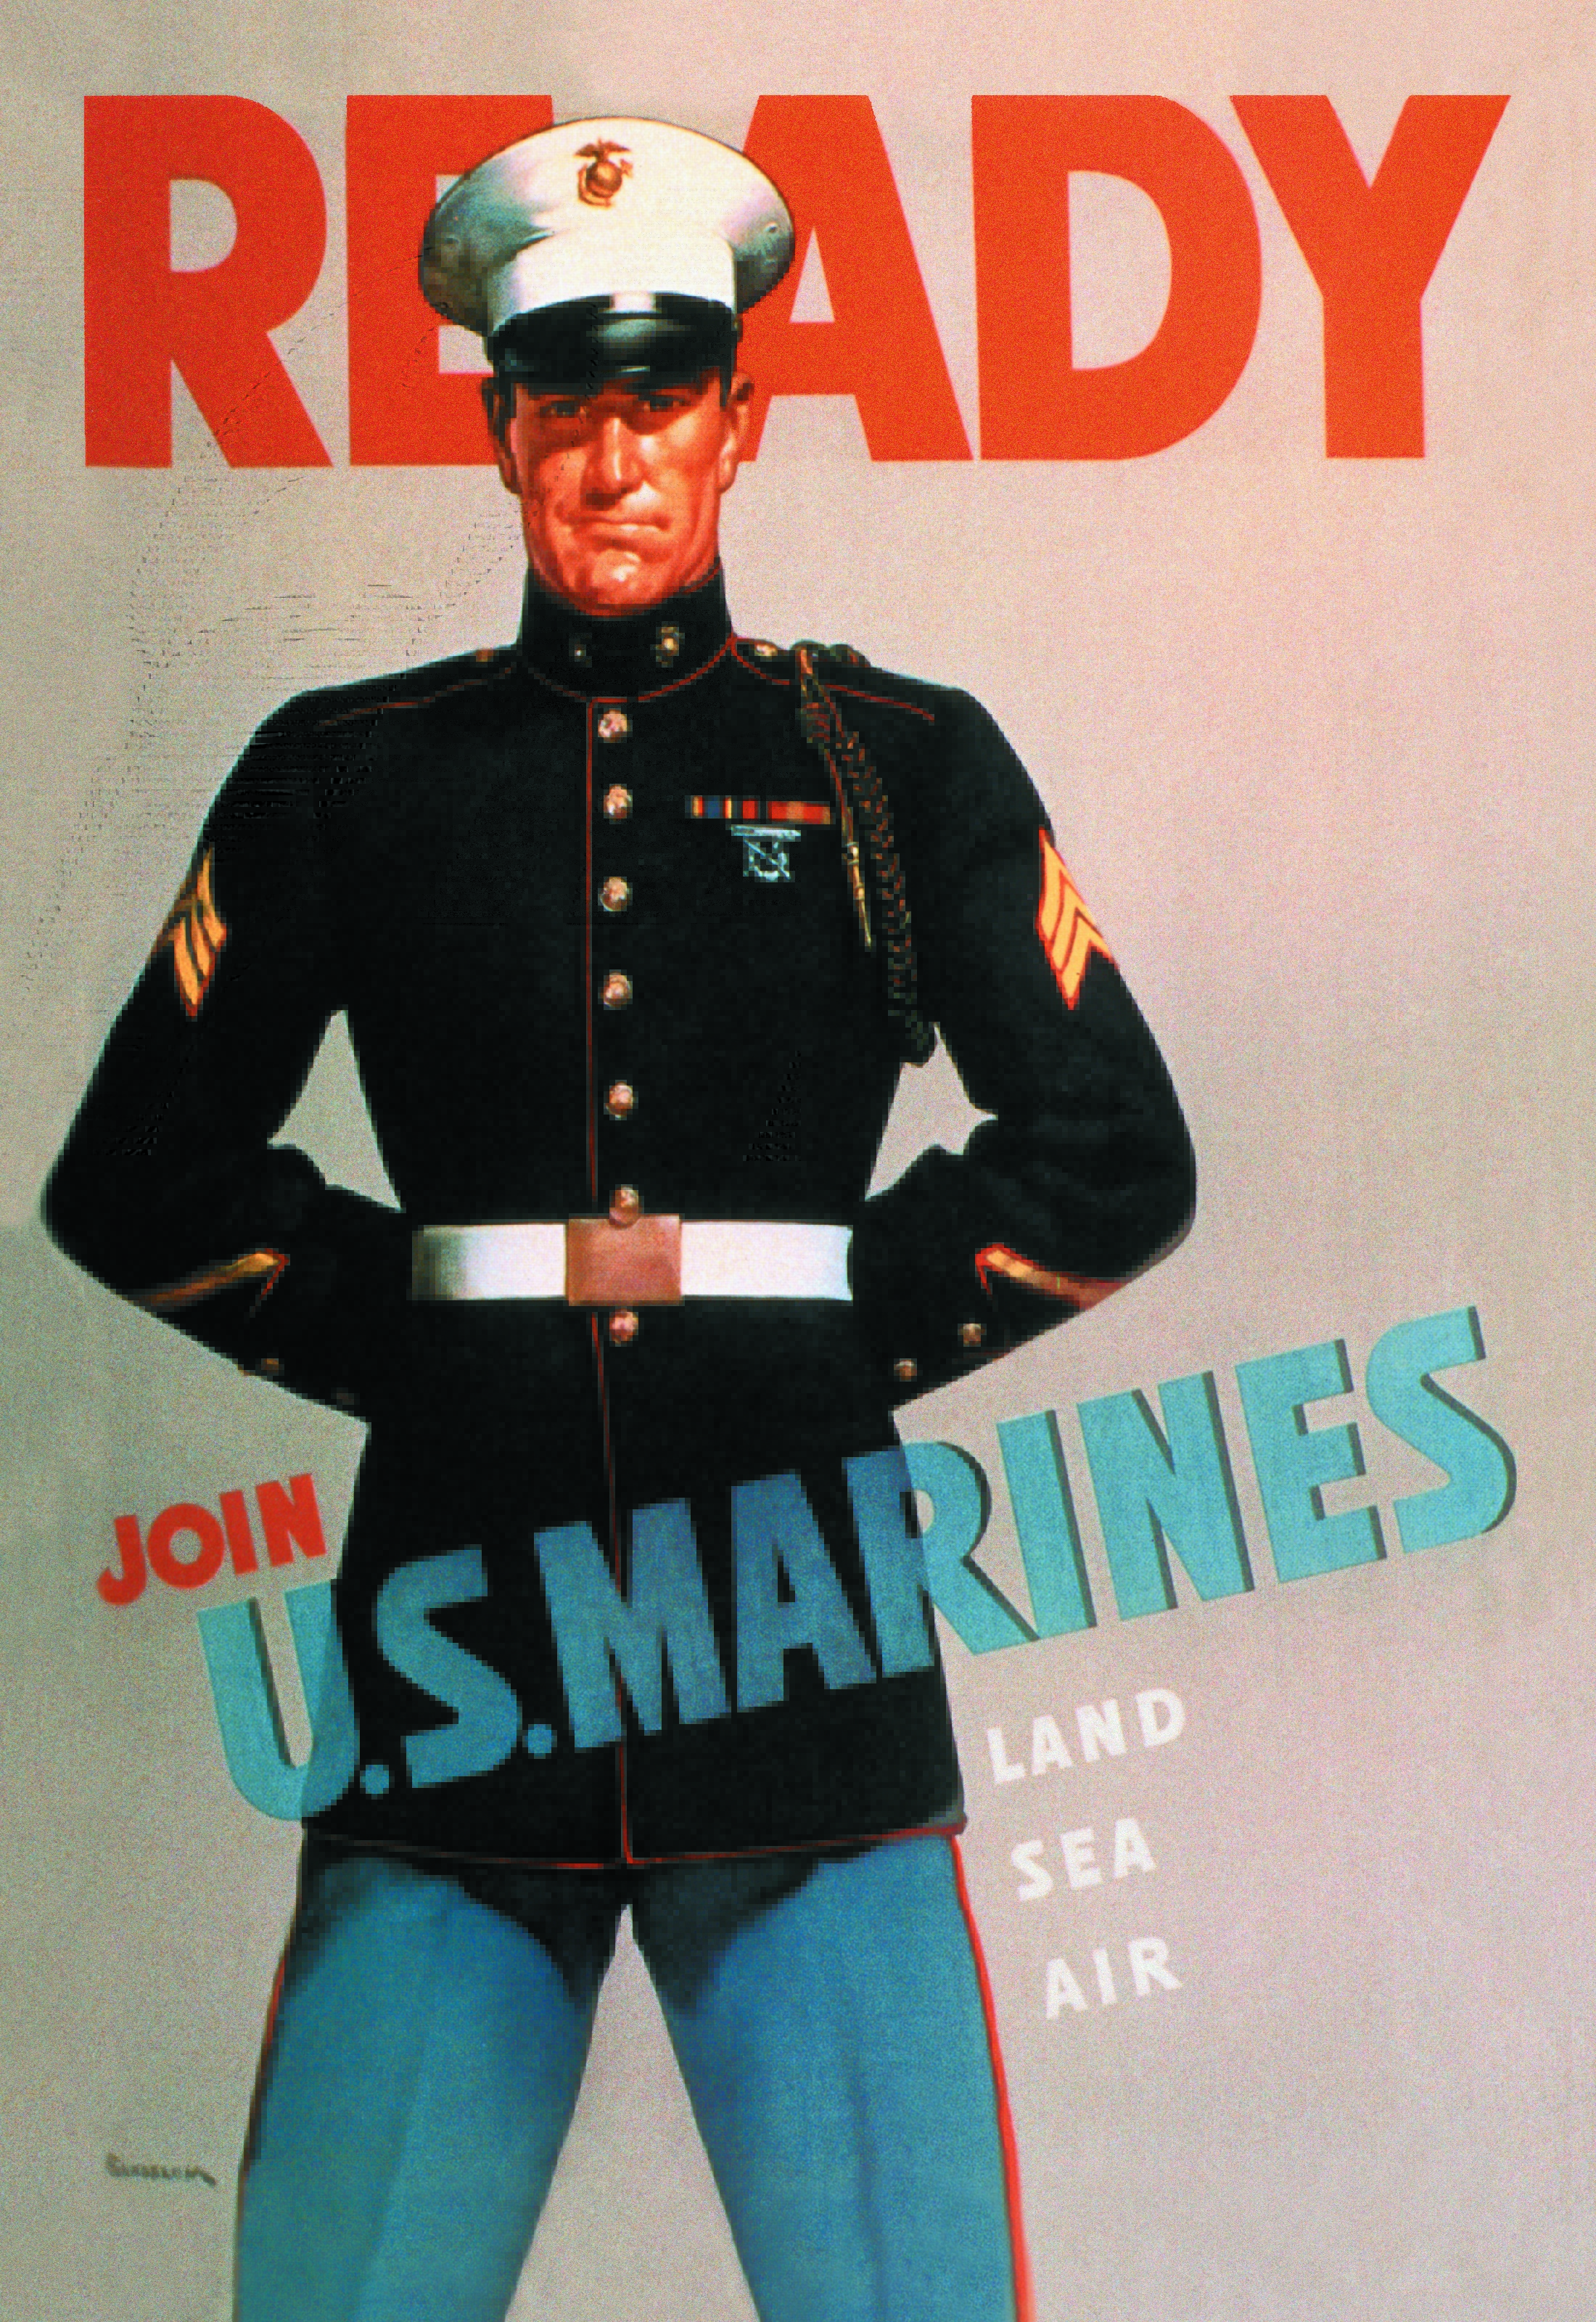 20th century  U.S. Marines recruitment poster (Buyenlarge / Getty Images)